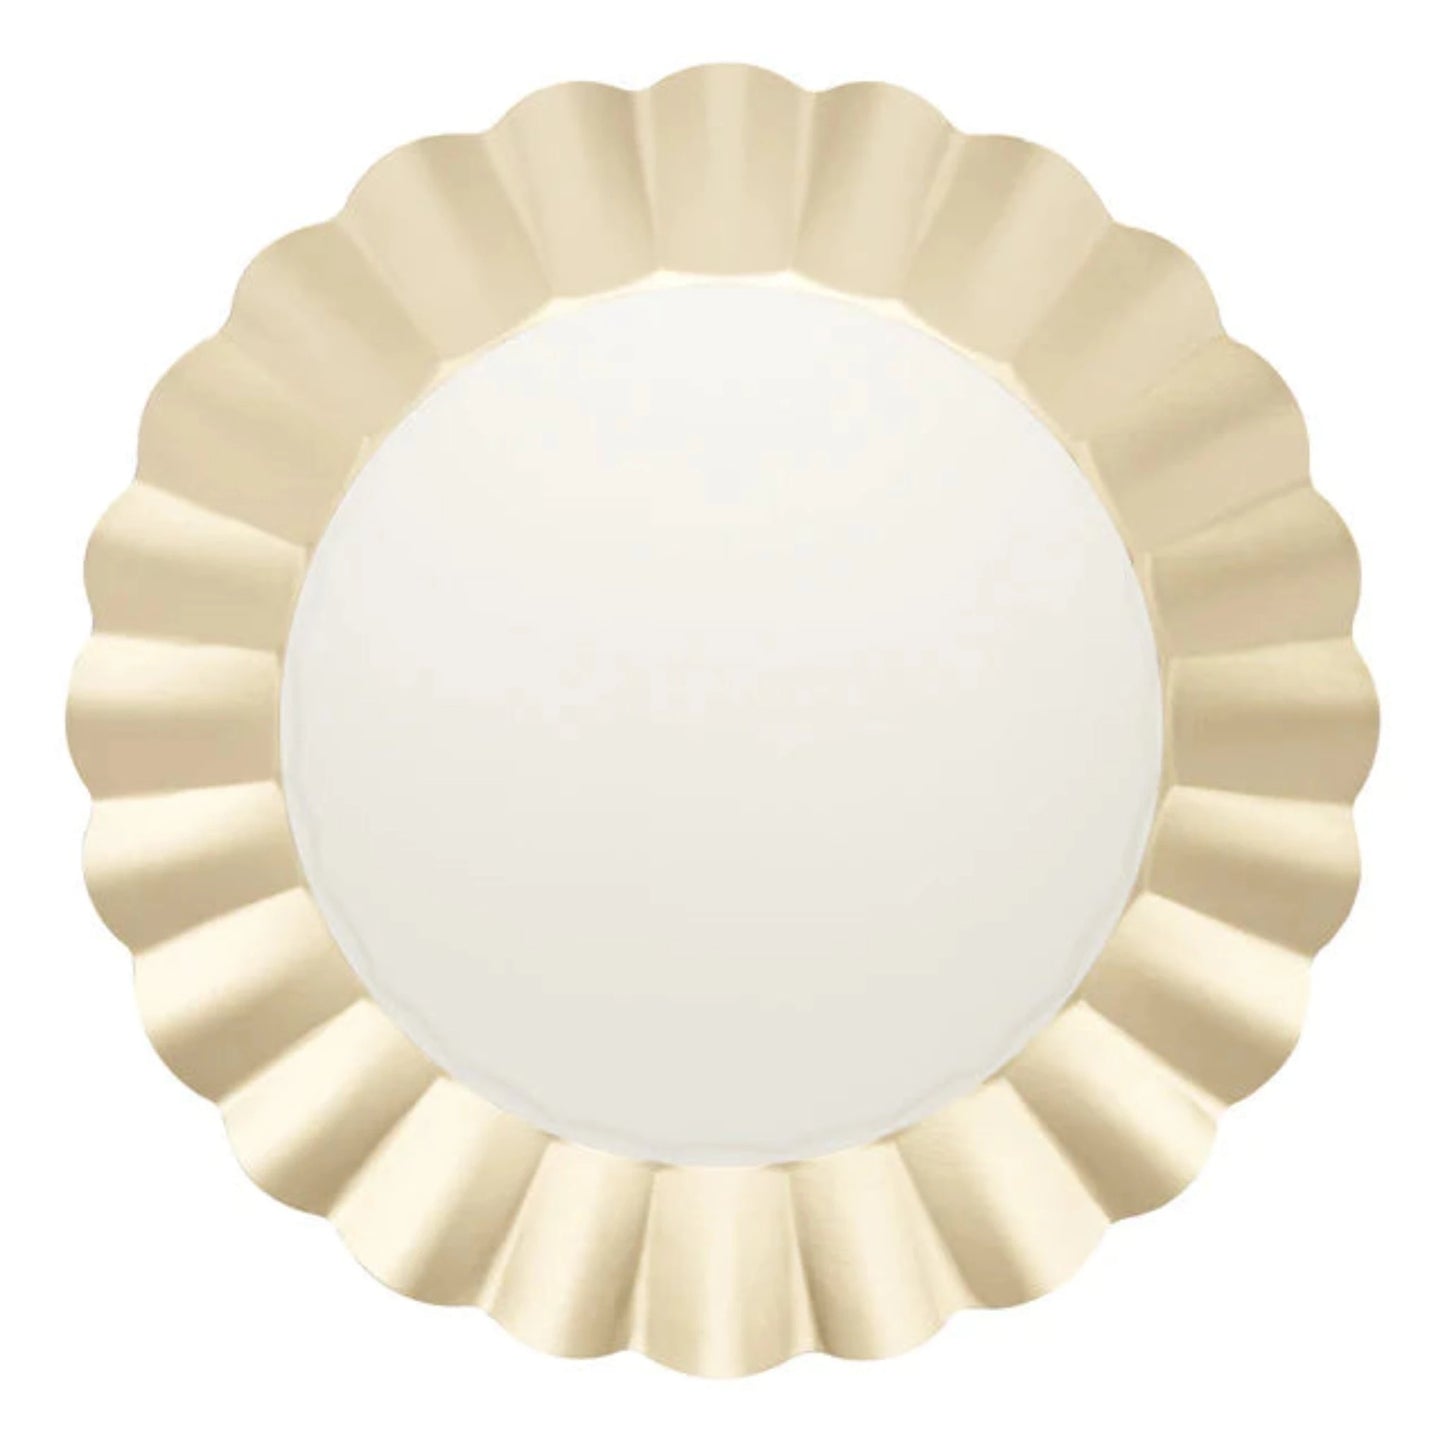 Charger Plate Gold Rimmed